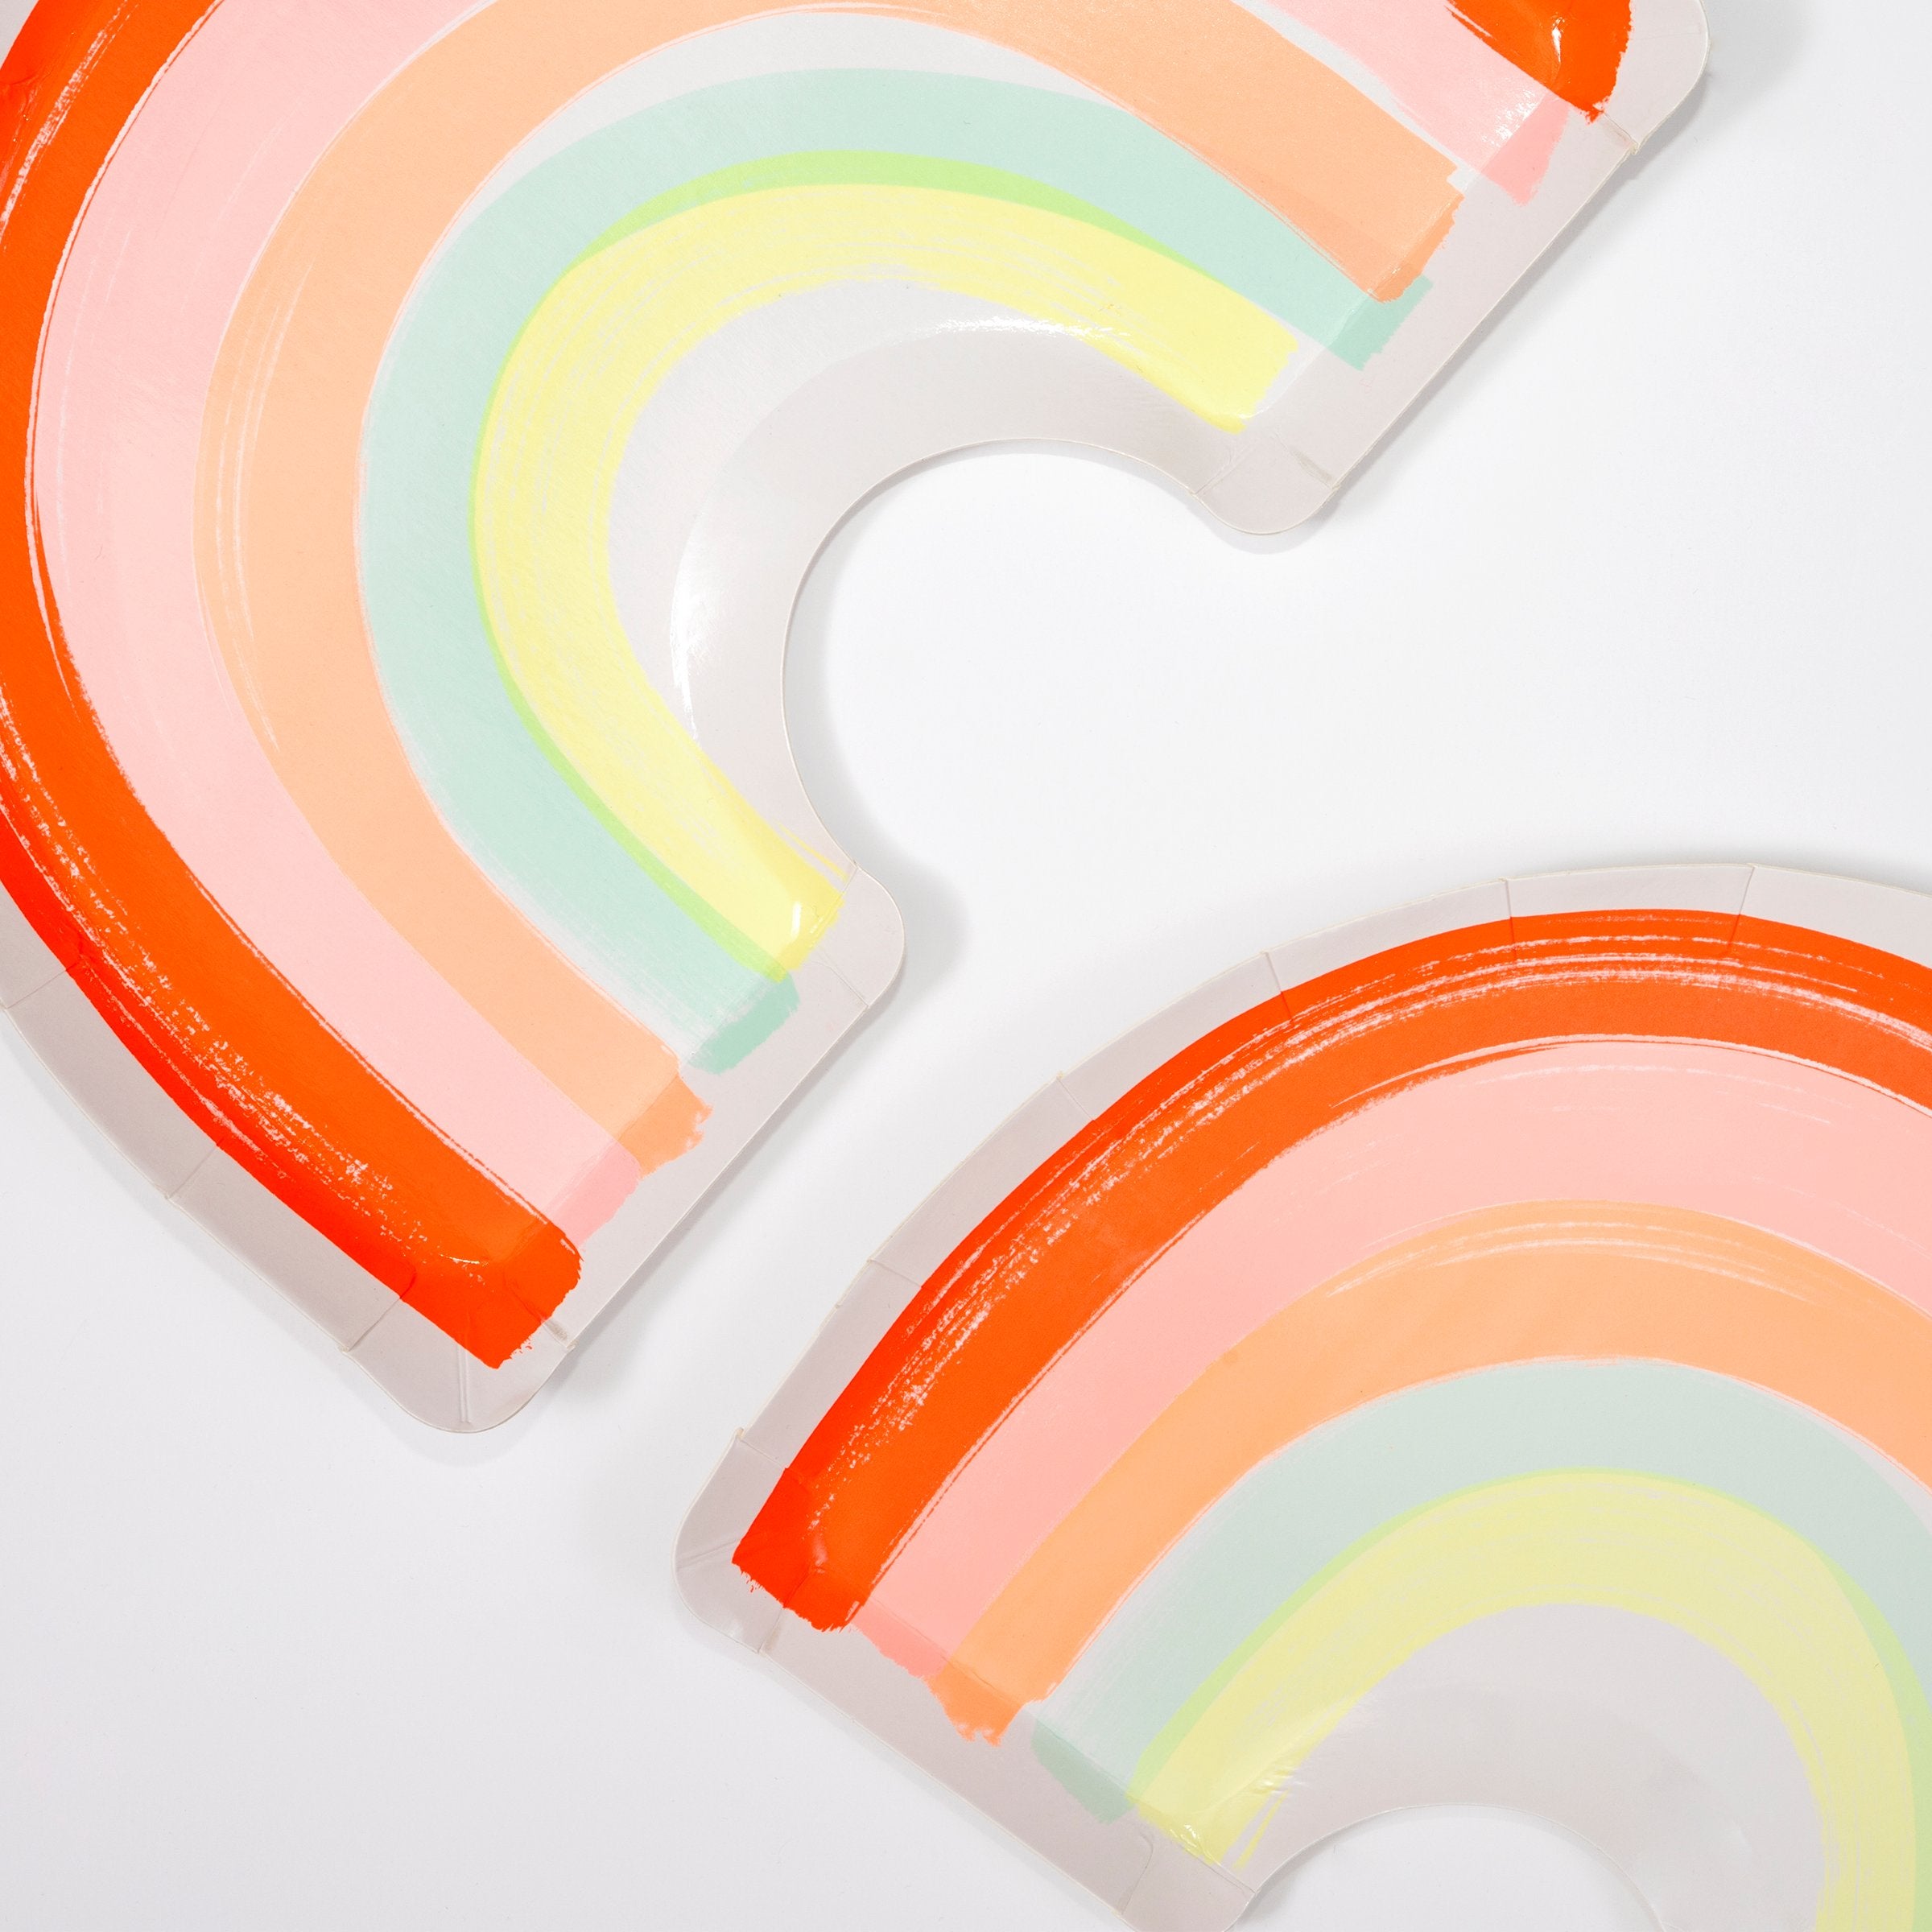 These paper plates are crafted in the shape of a rainbow with lots of bright neon colors.